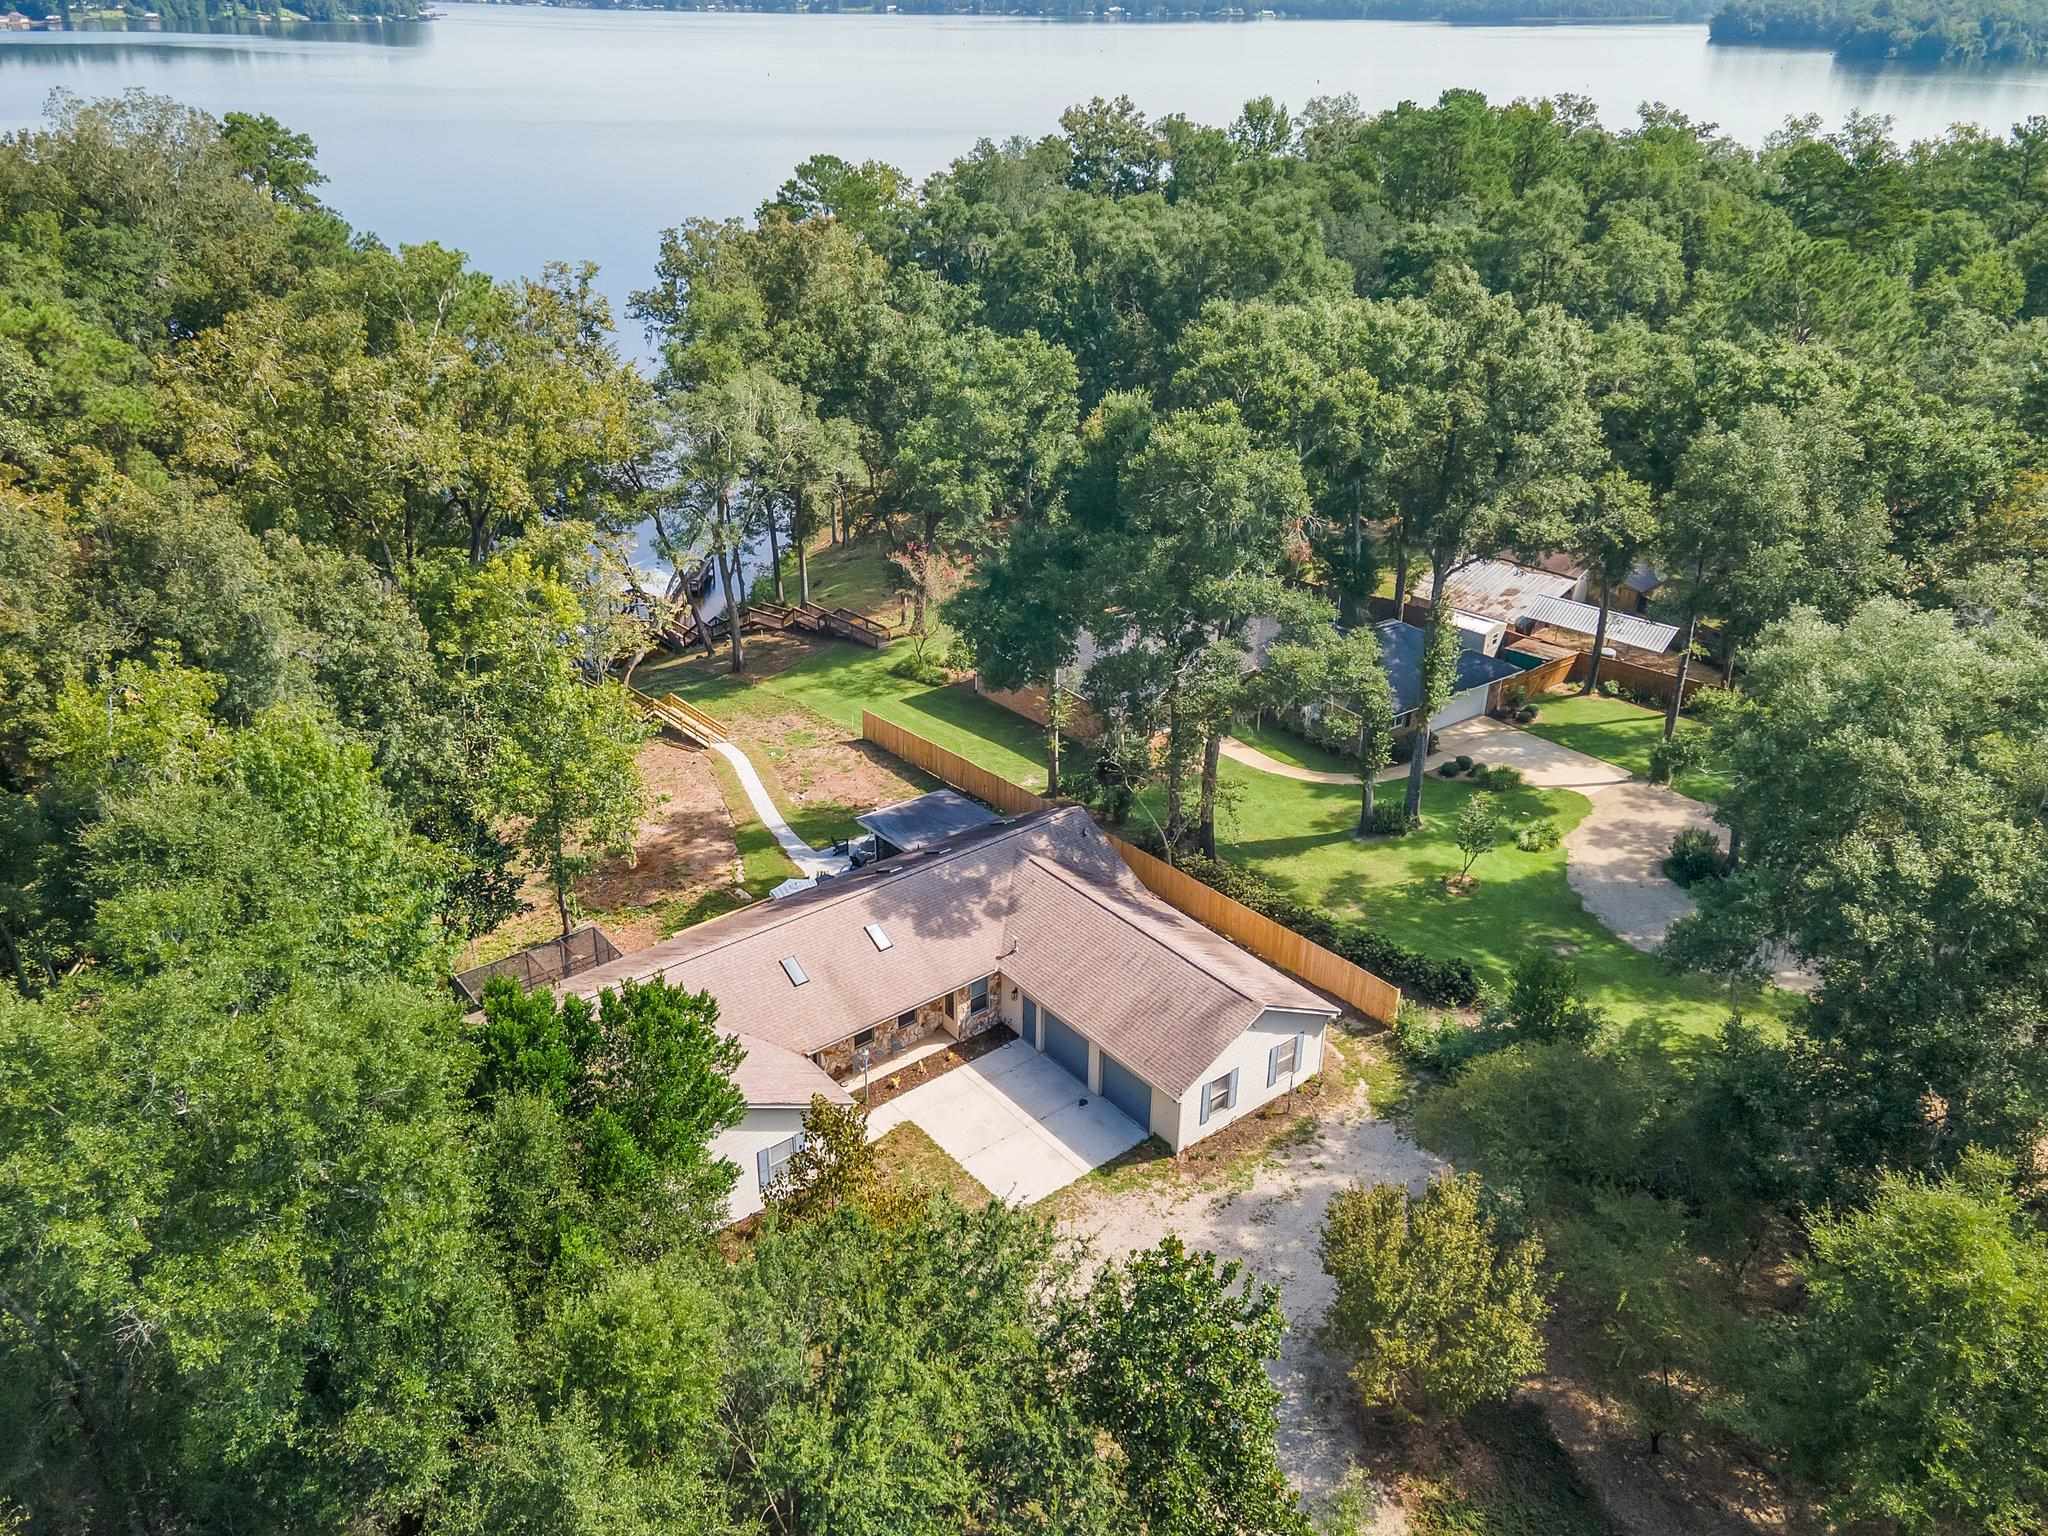 Property: 2873 Parramore Shores Road,Tallahassee, FL